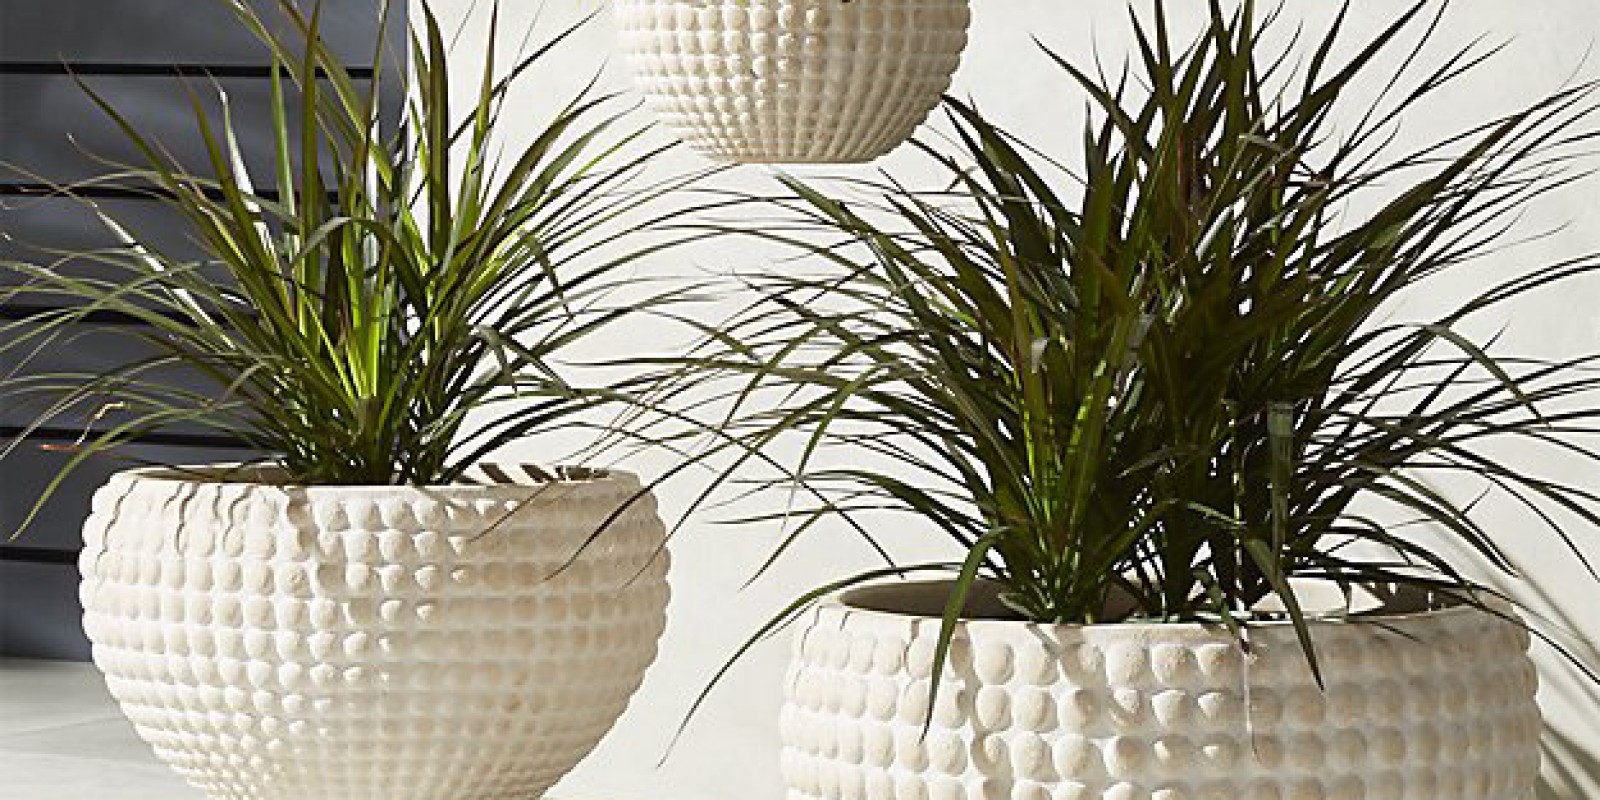 Statement-Making Large Outdoor Planters